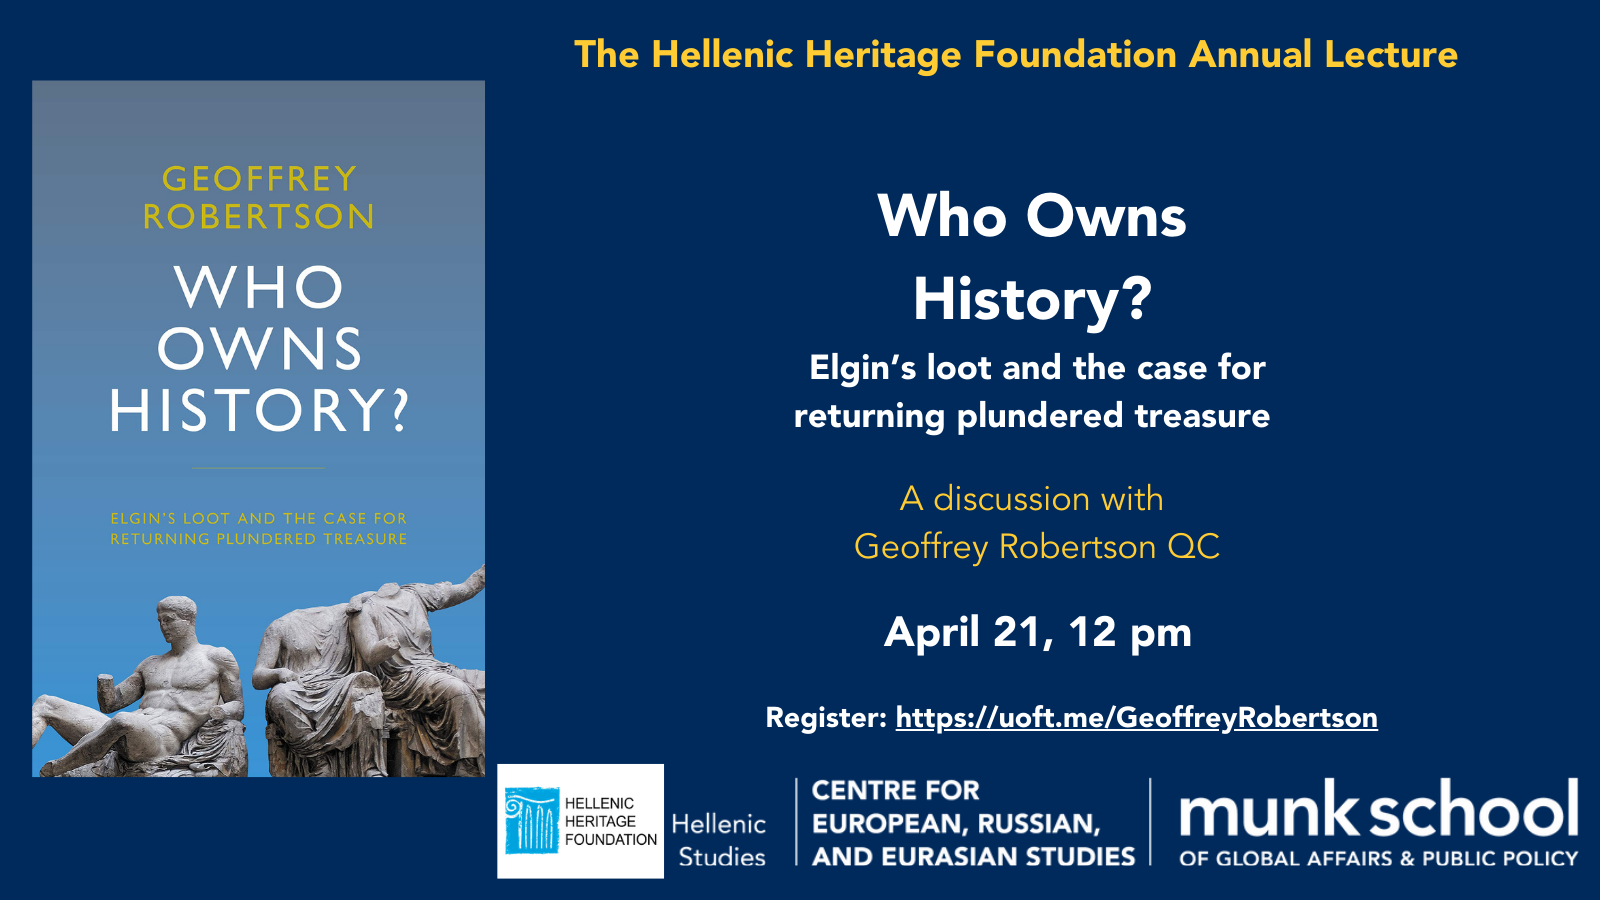 The Hellenic Heritage Foundation Annual Lecture